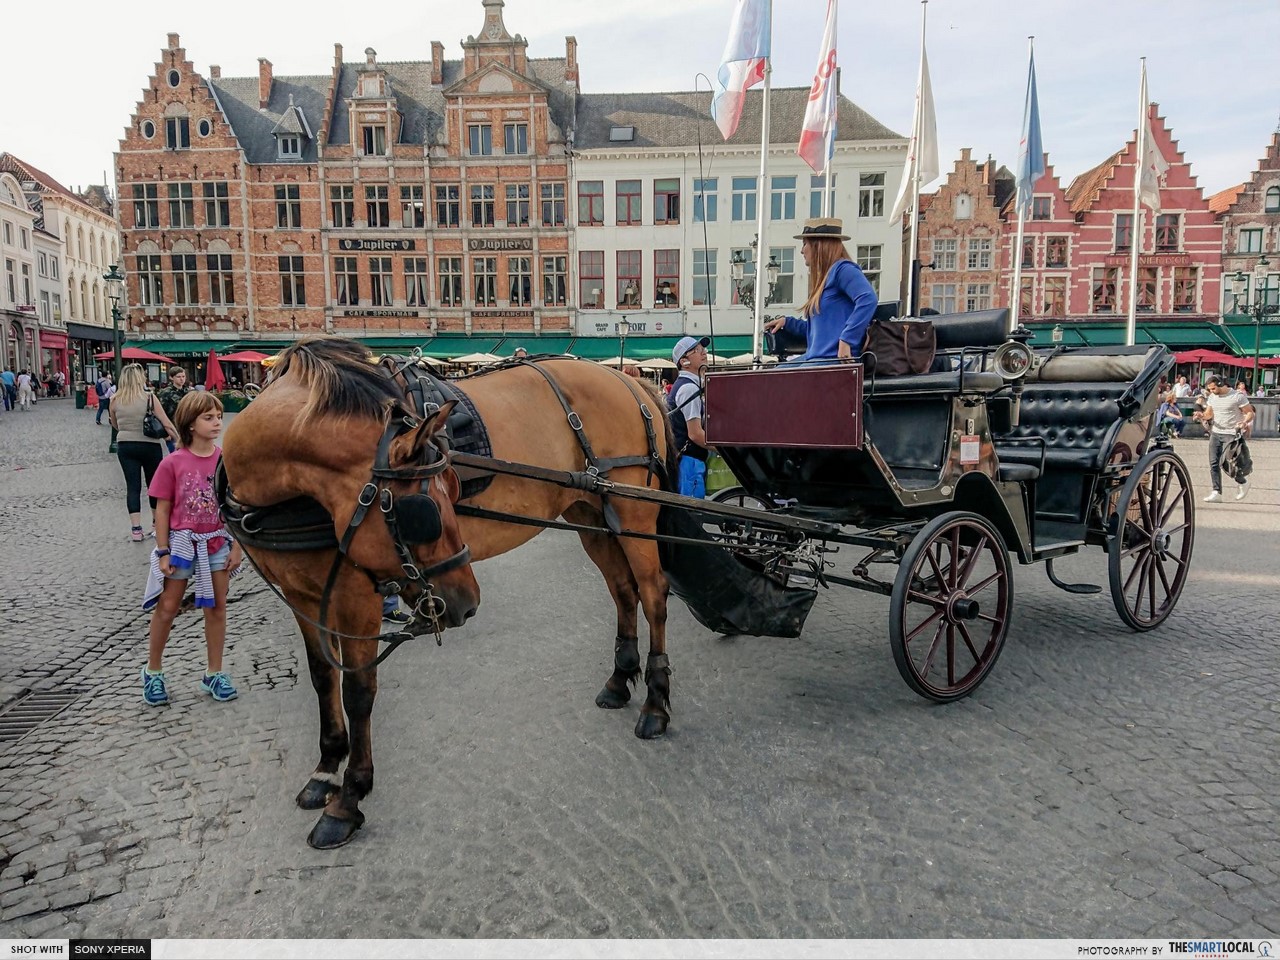 Brussels 7 things (15) - Brugge horse carriage